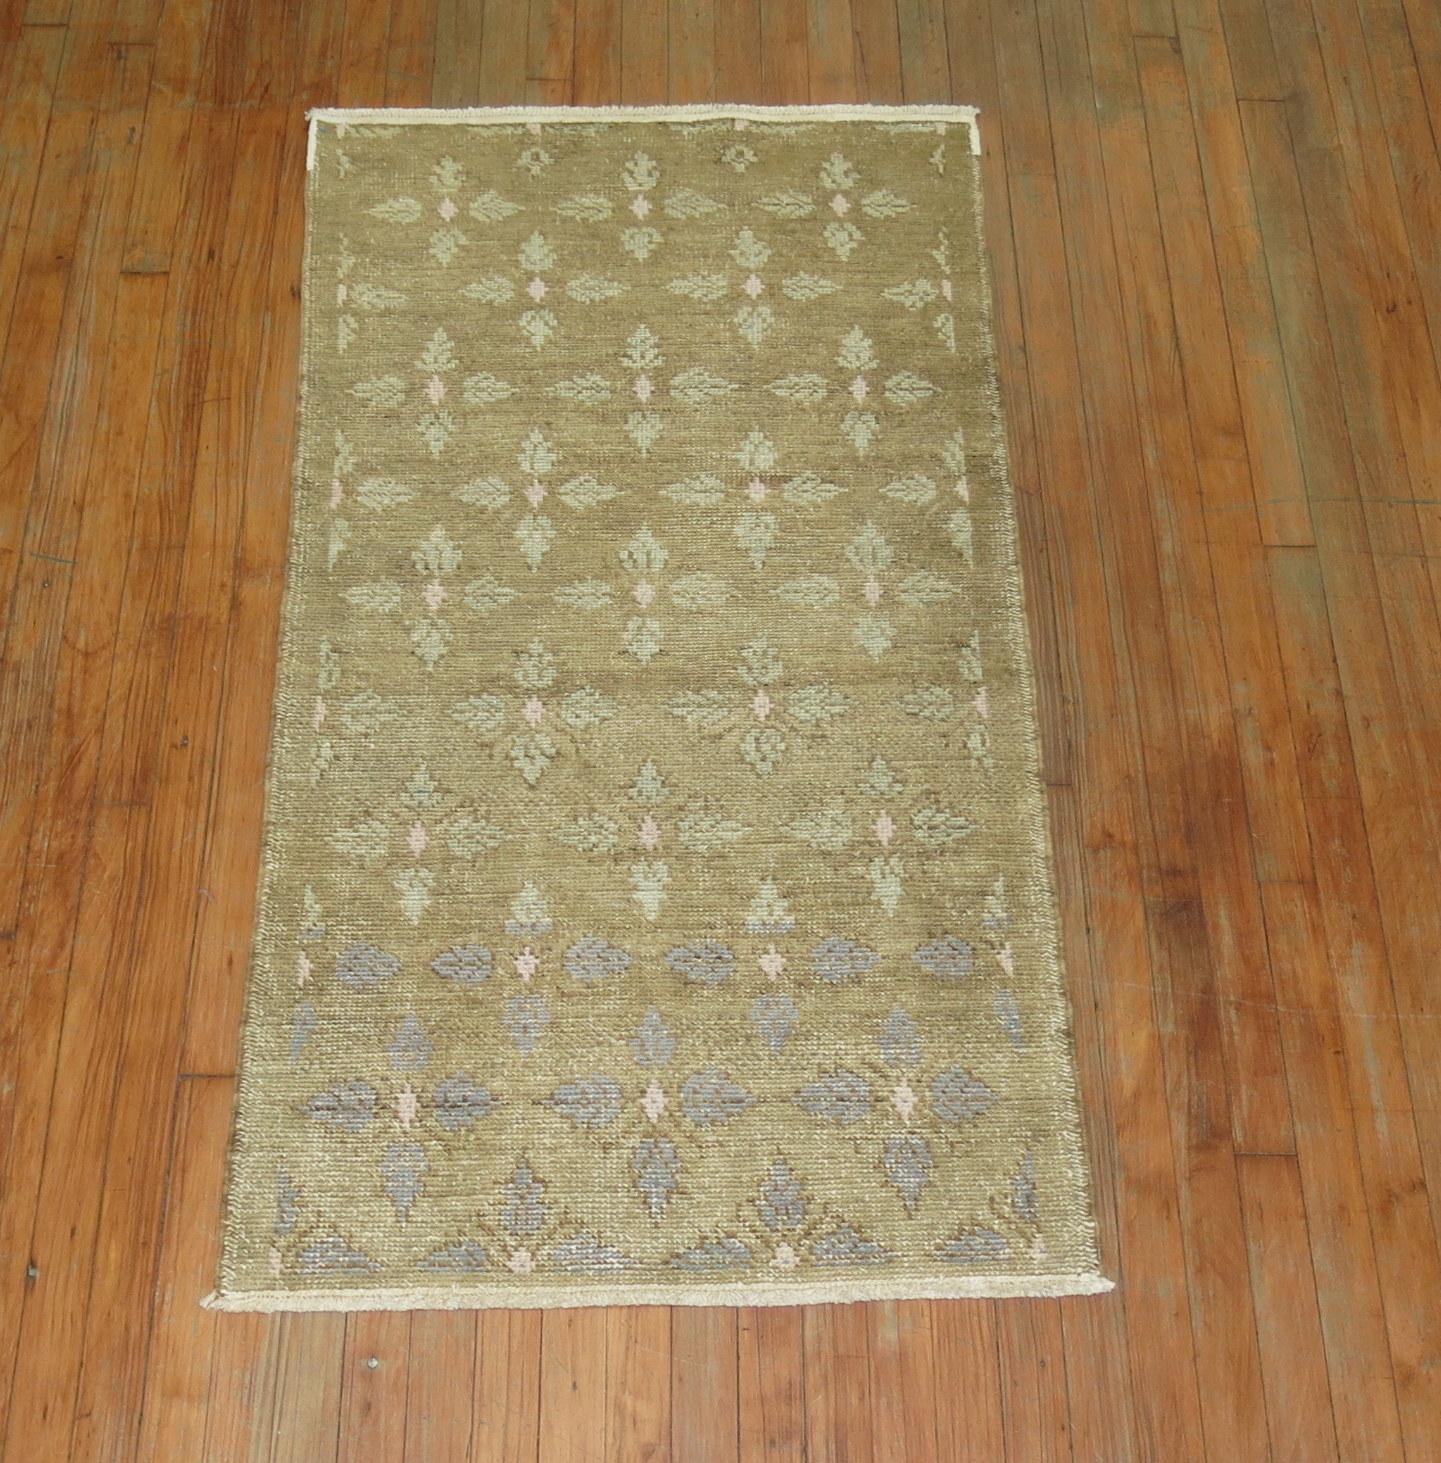 Wool Neutral Color Turkish Scatter Rug, Mid-20th Century